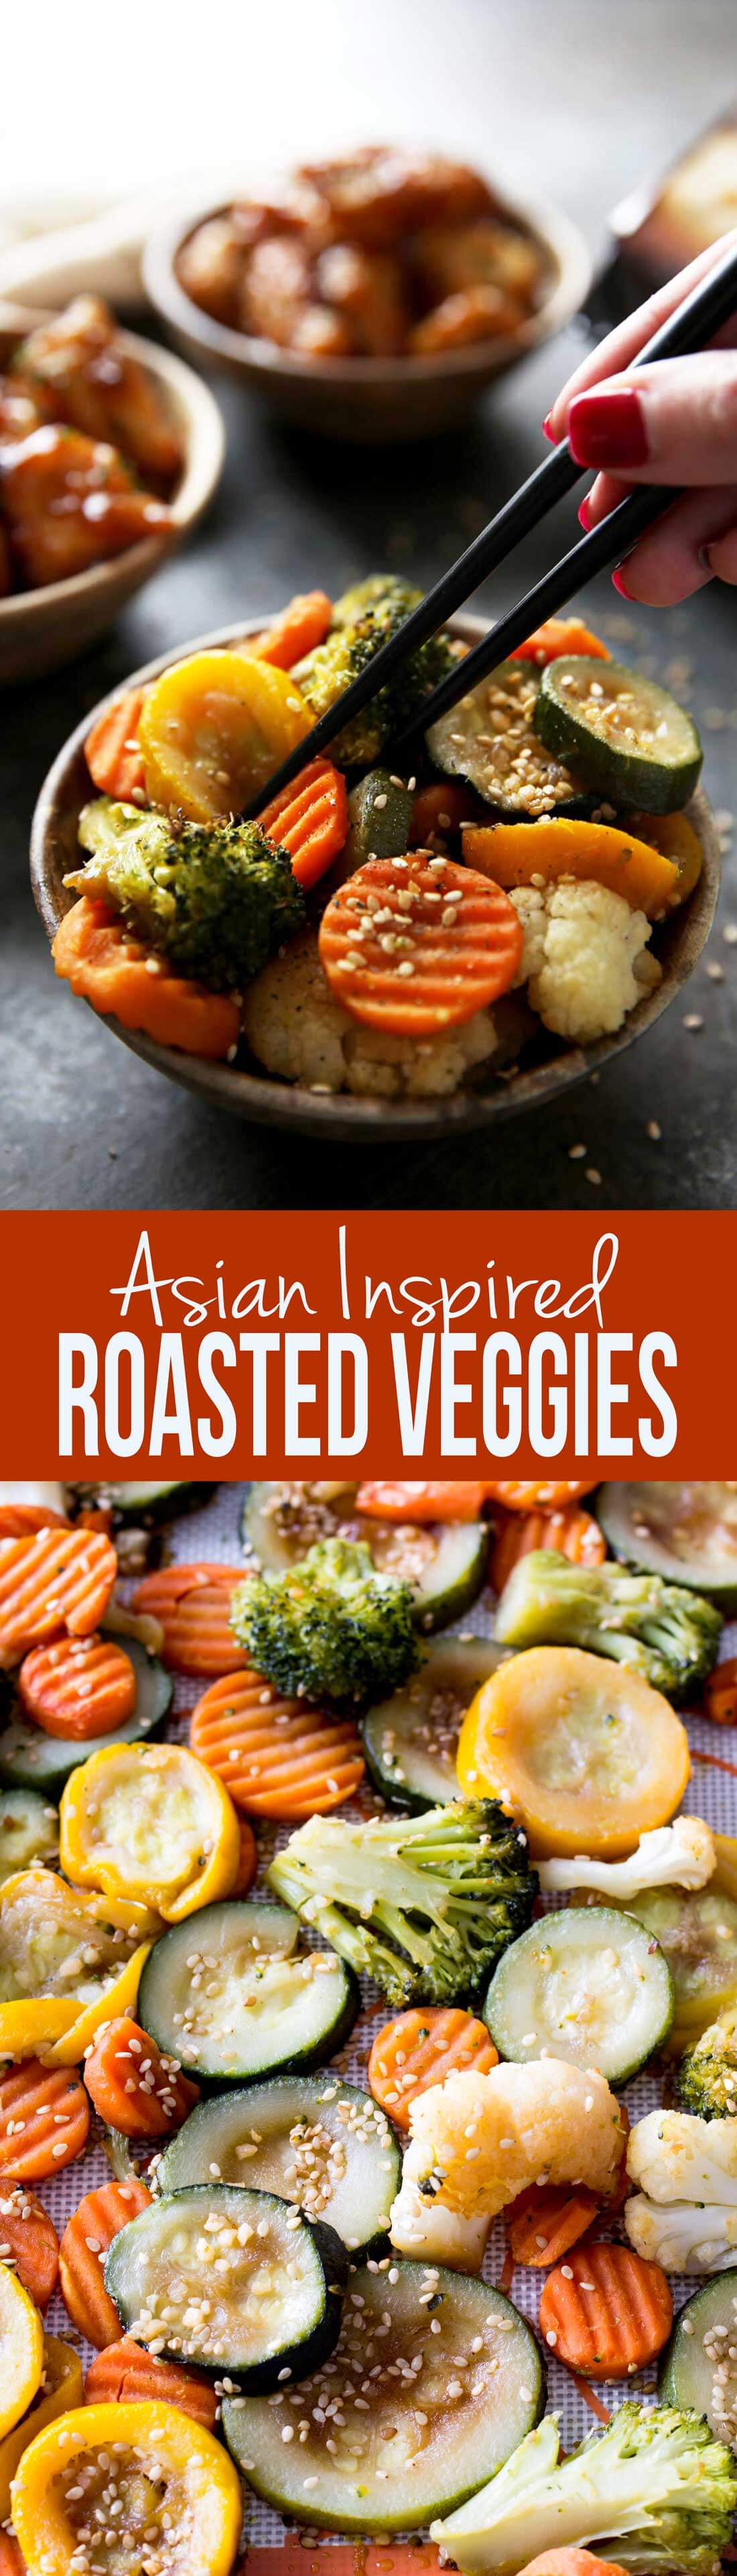 Asian Inspired Roasted Veggies - Easy Peasy Meals